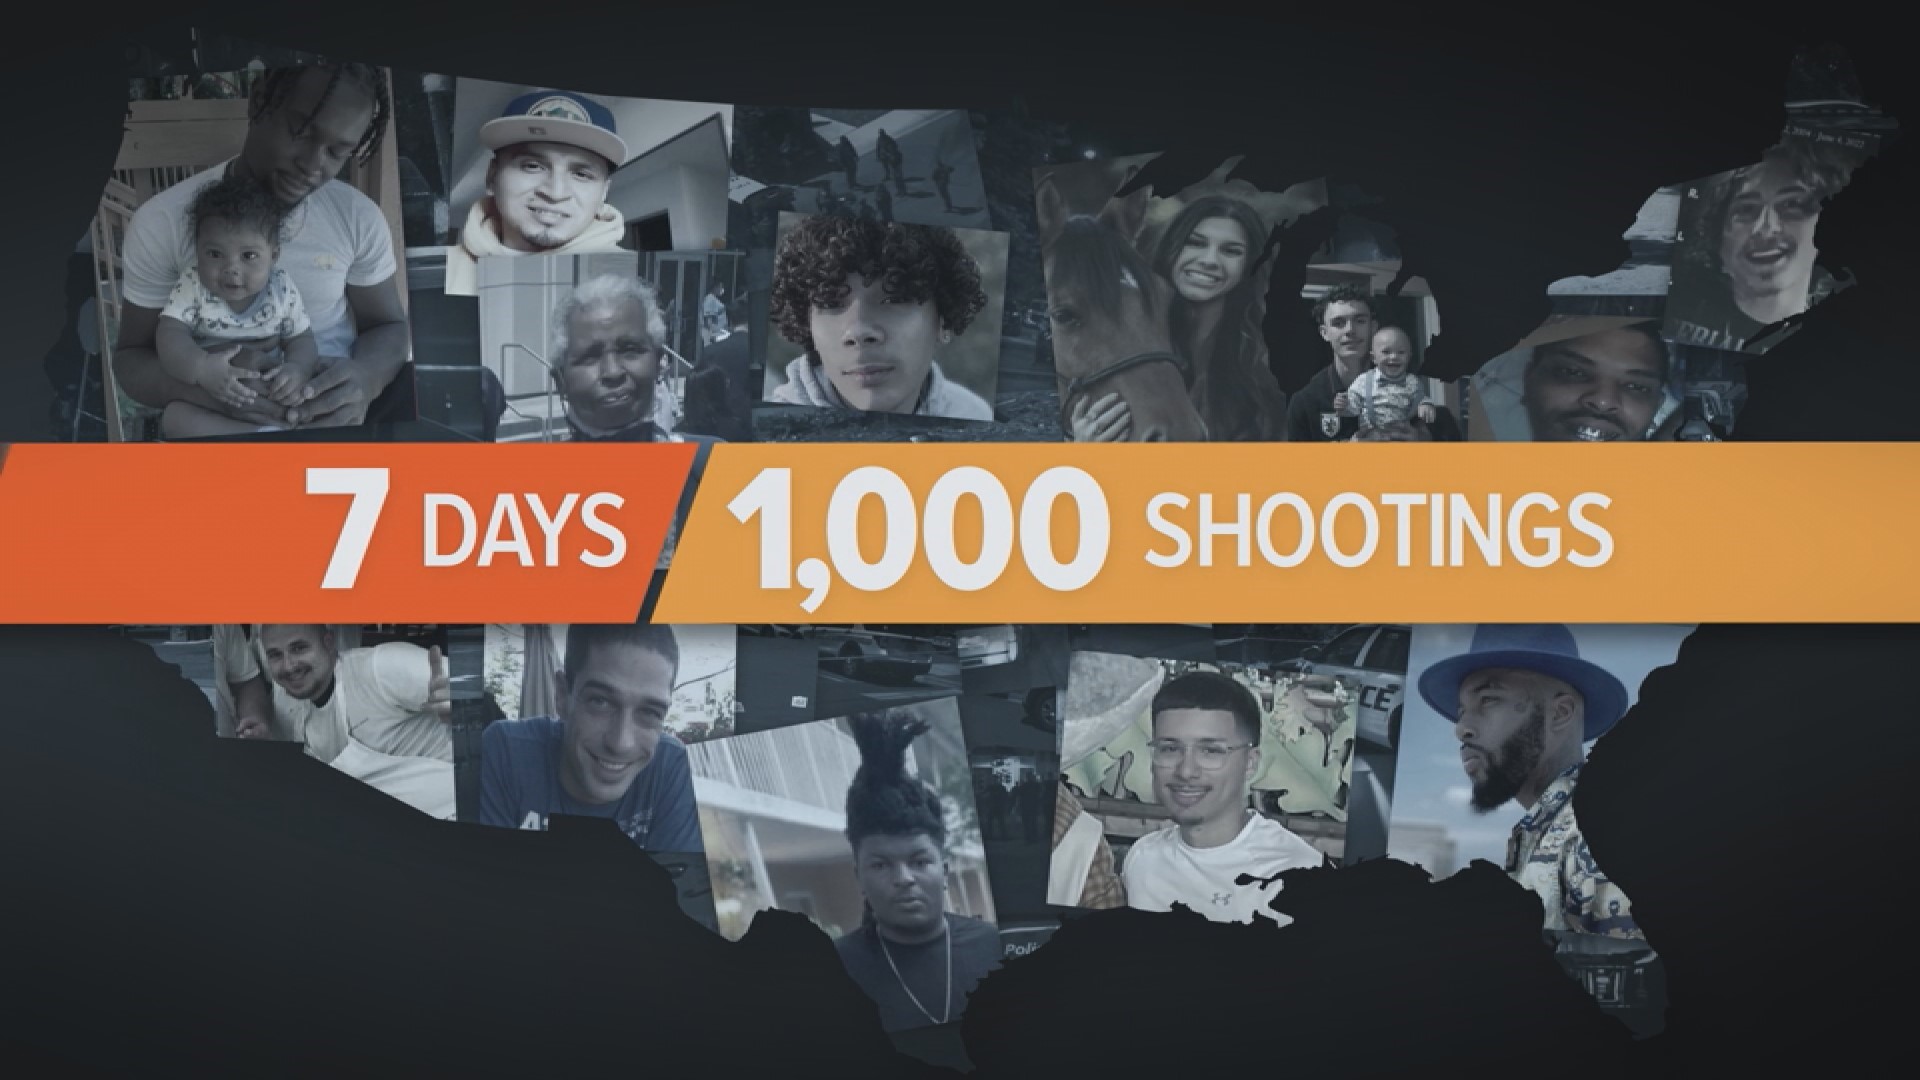 TEGNA stations looked at one week -- and it showed a nation gripped by gun violence.